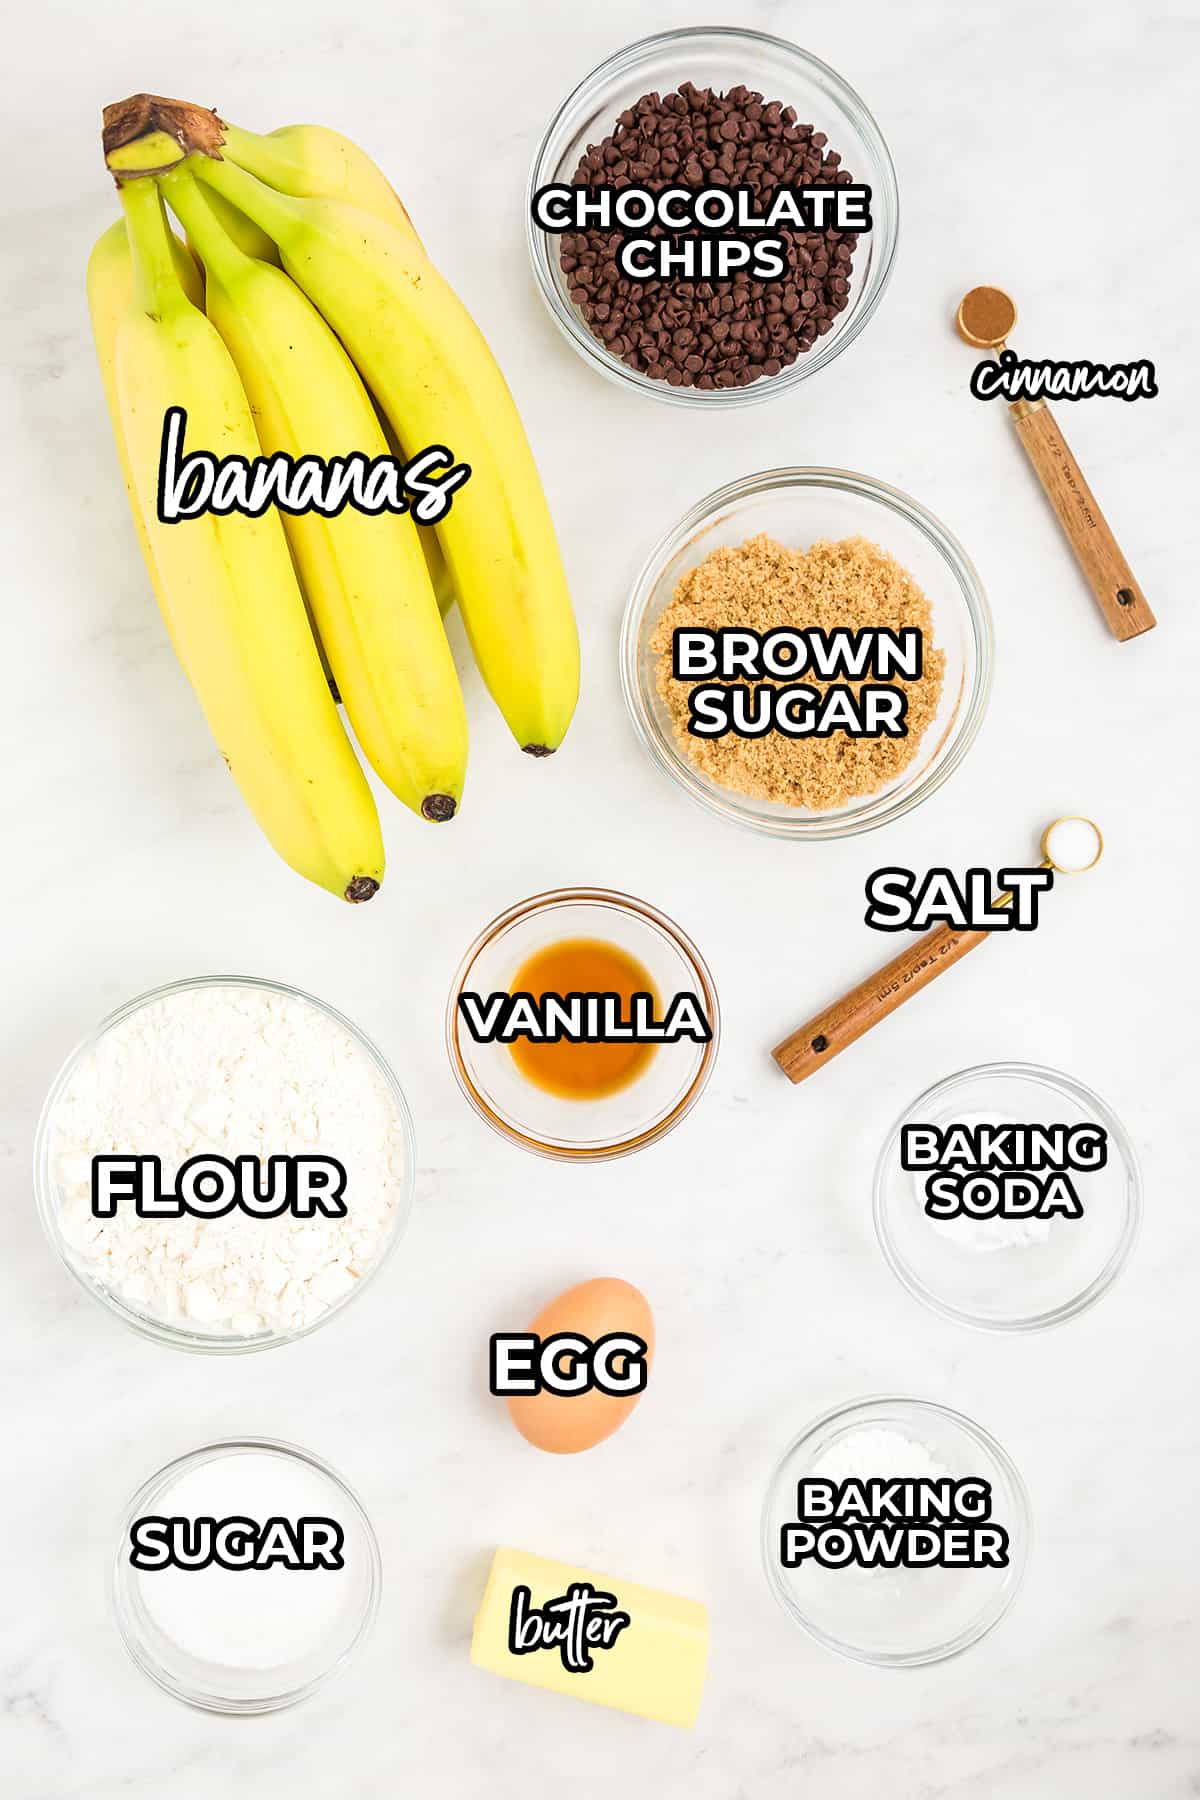 Ingredients for mini banana muffins with chocolate chips.